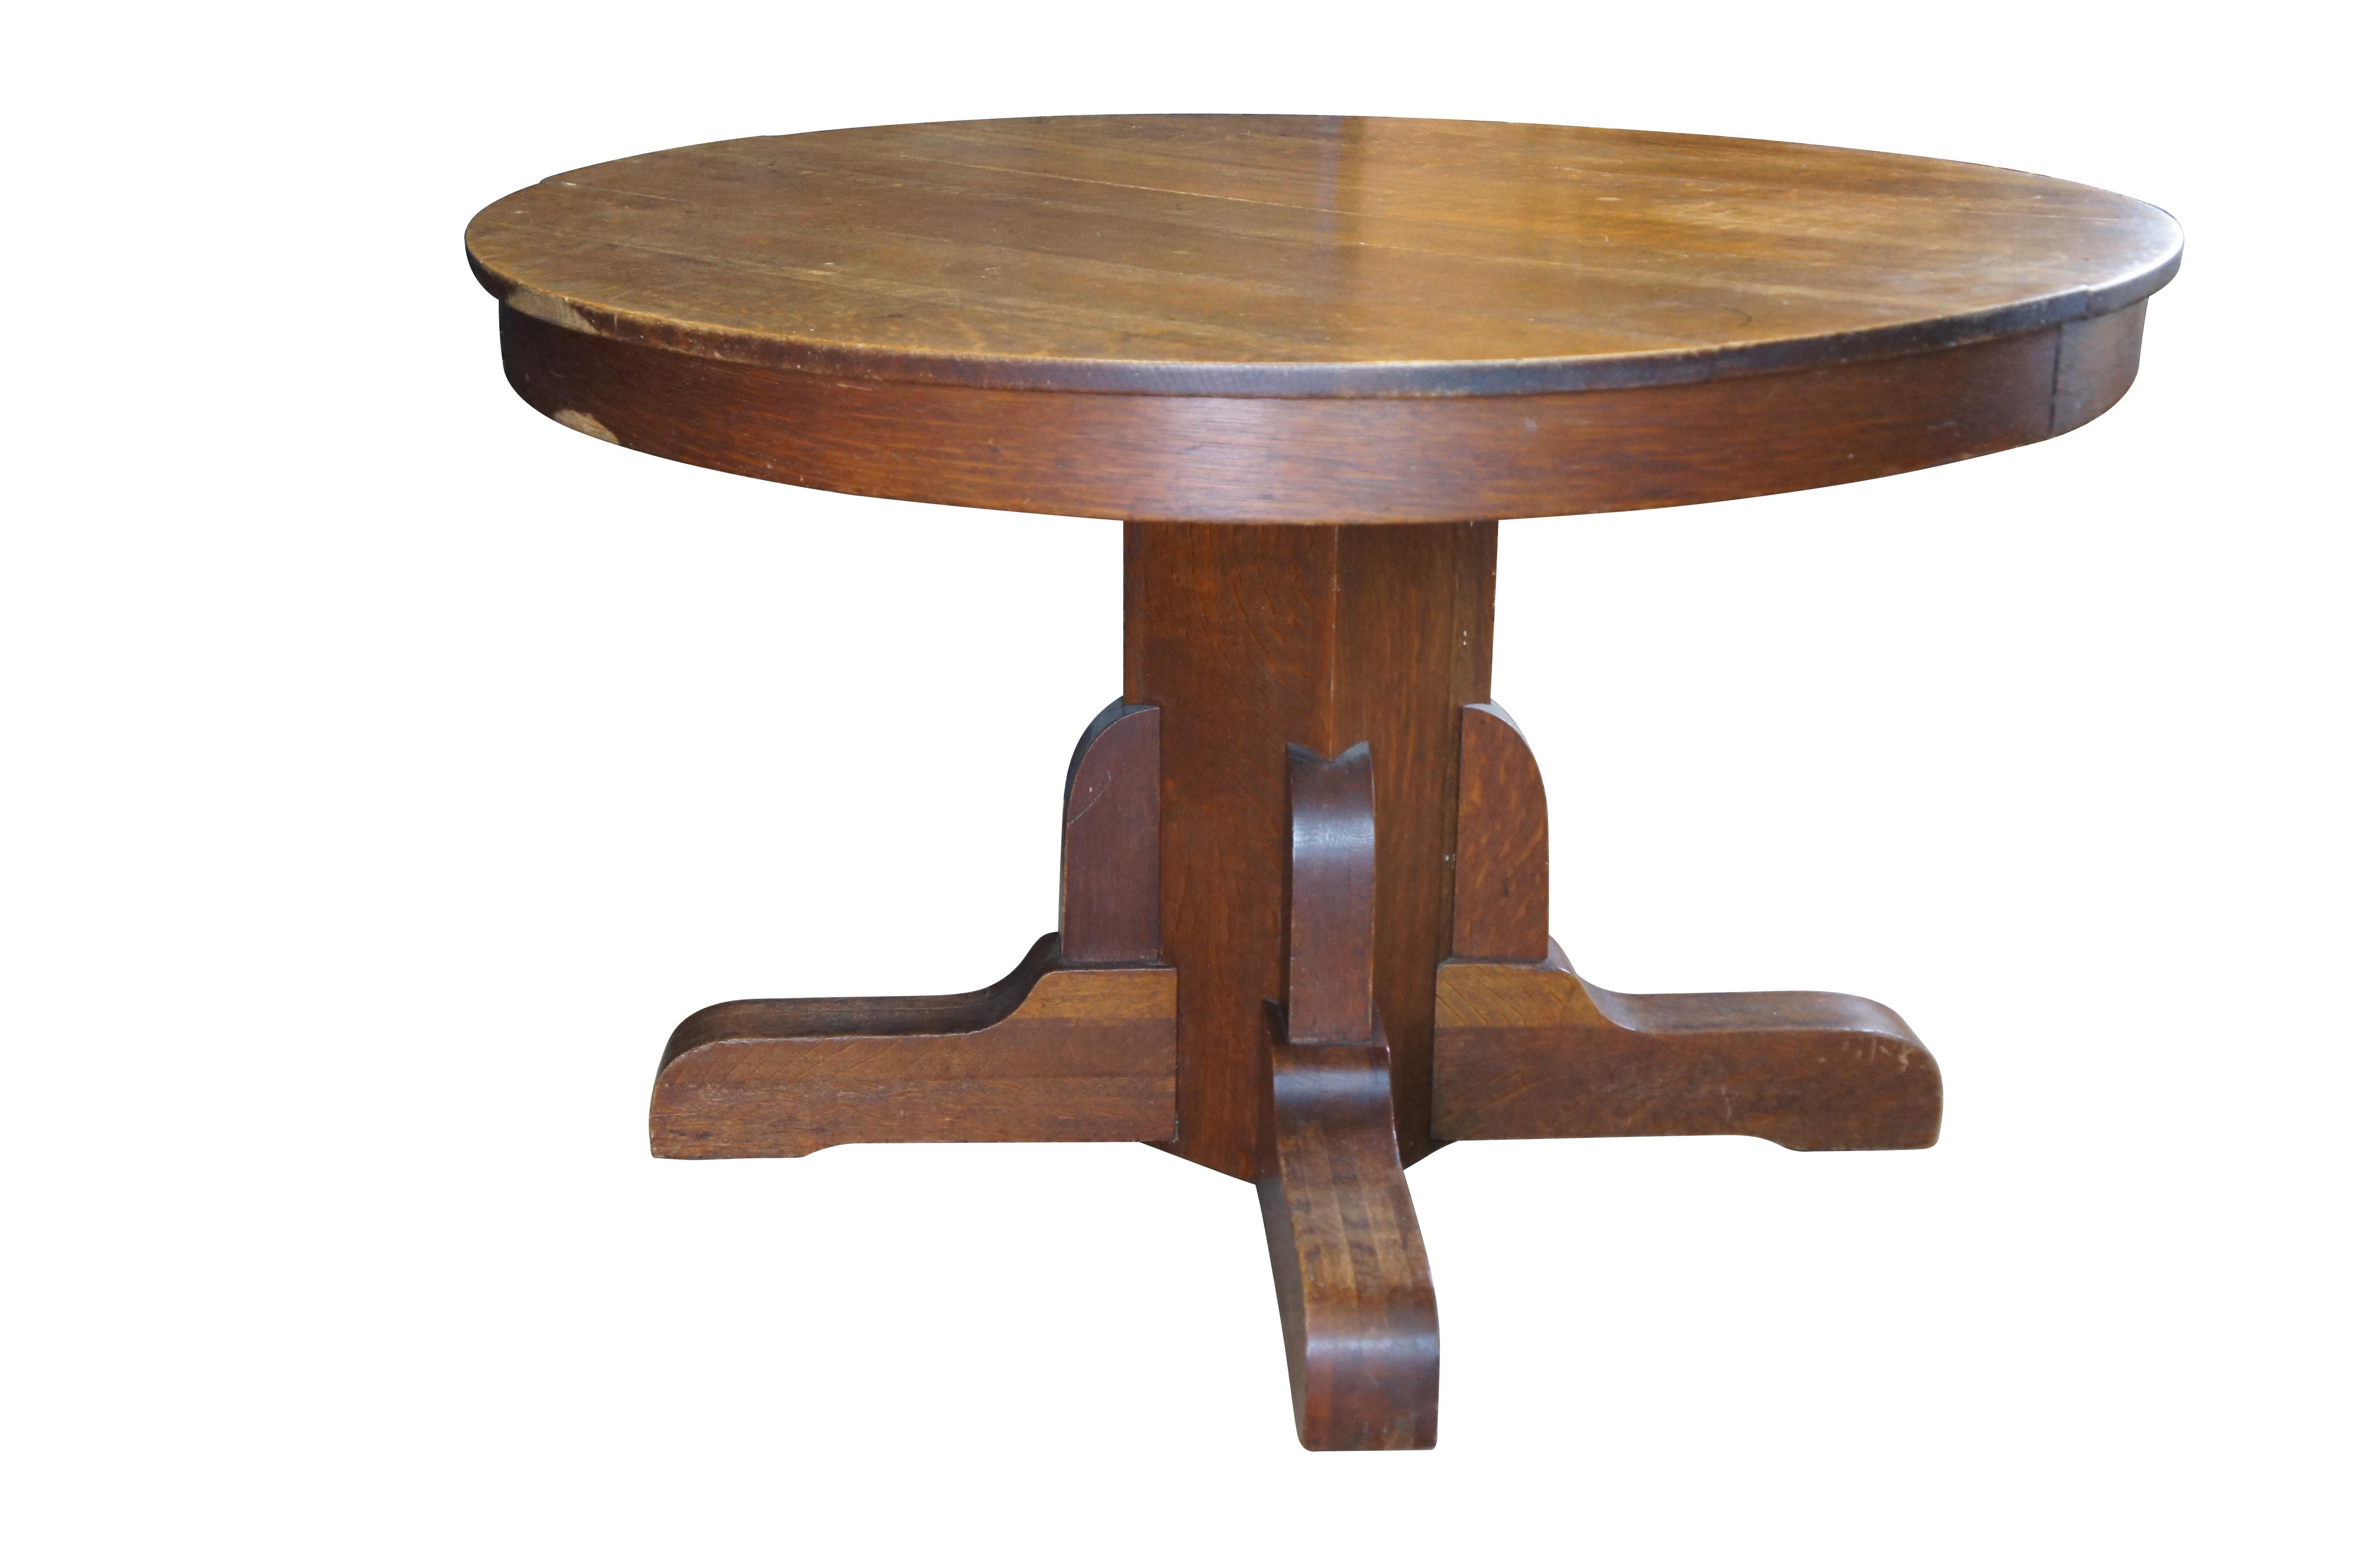 Antique Mission style round dining or breakfast table featuring square pedestal base with castors.

Dimensions:
48 x 48